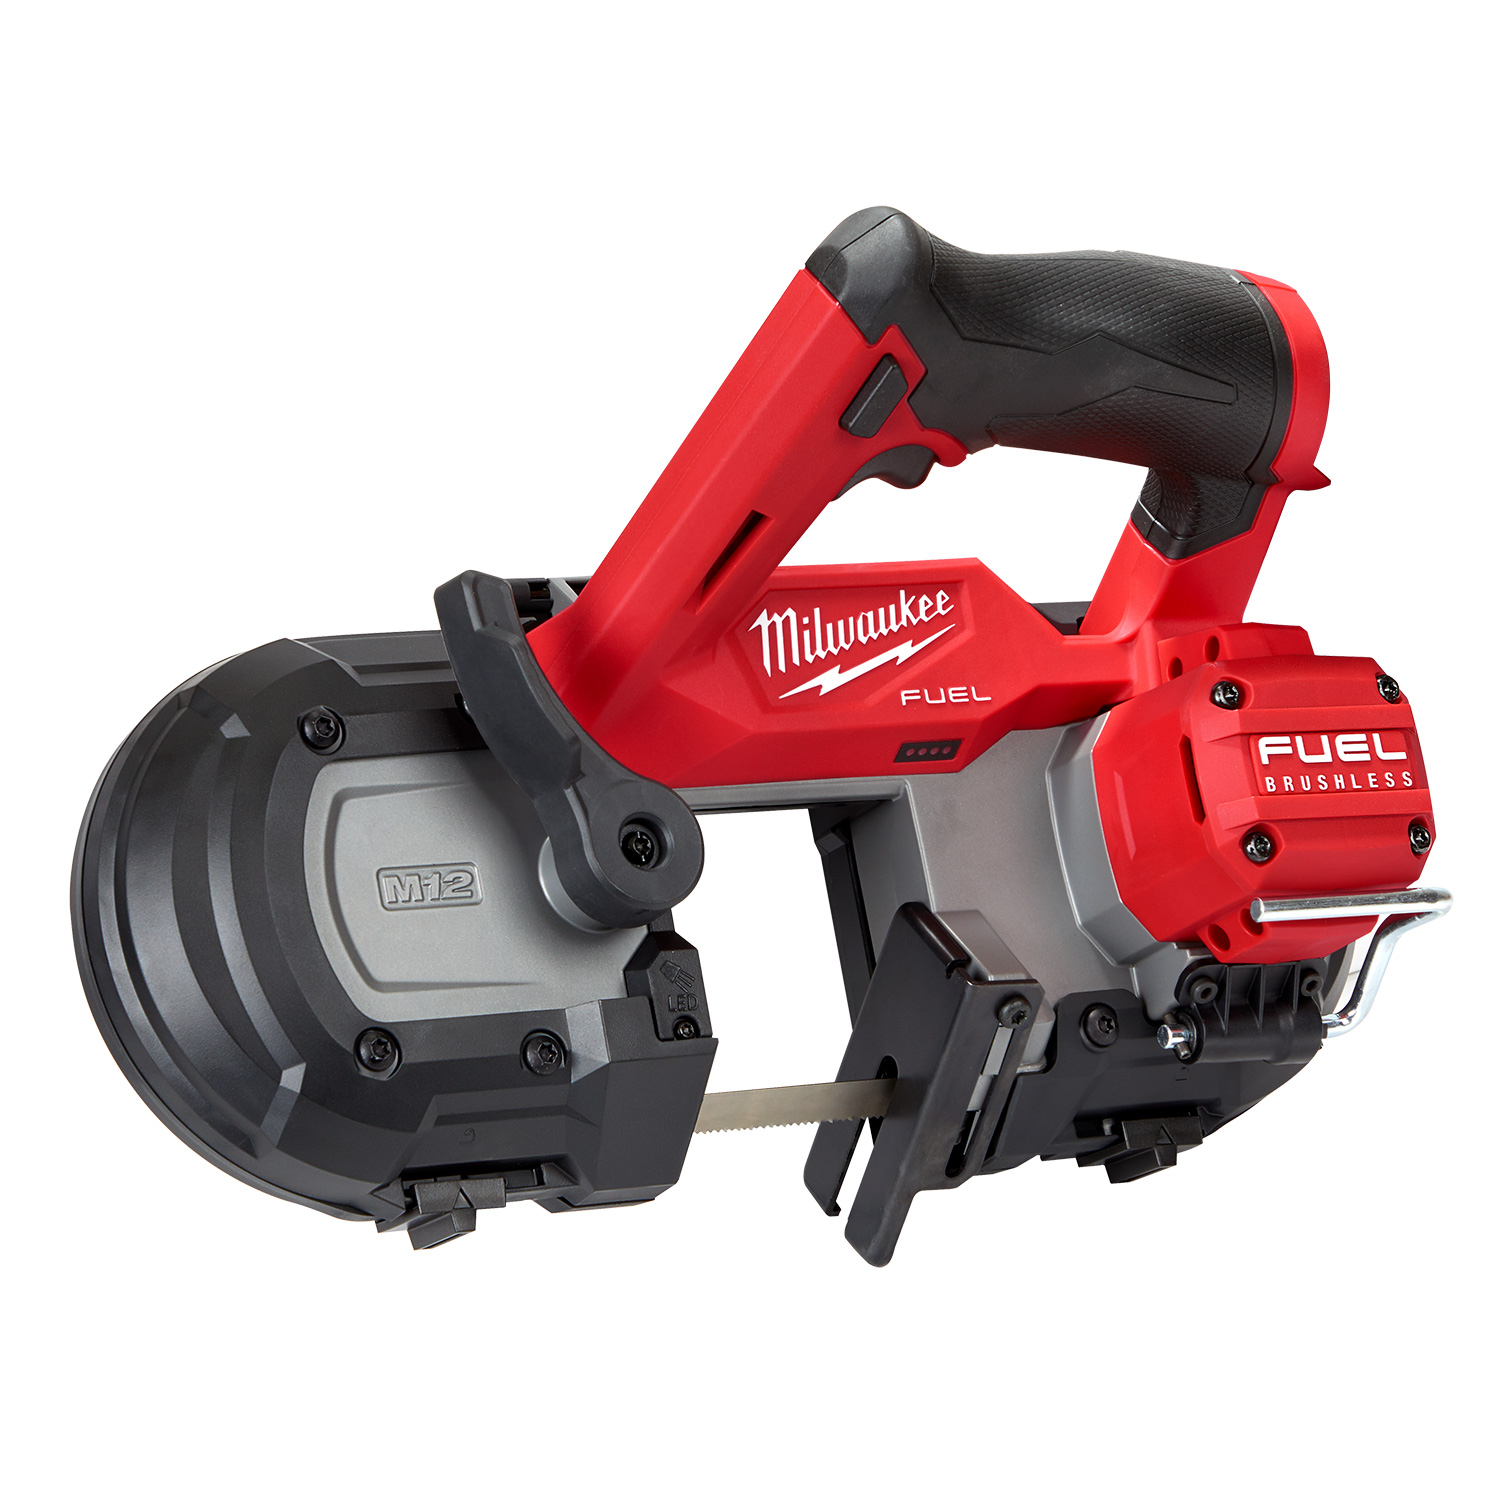 Milwaukee 12V Fuel Brushless Bandsaw (tool only) M12FBS64-0